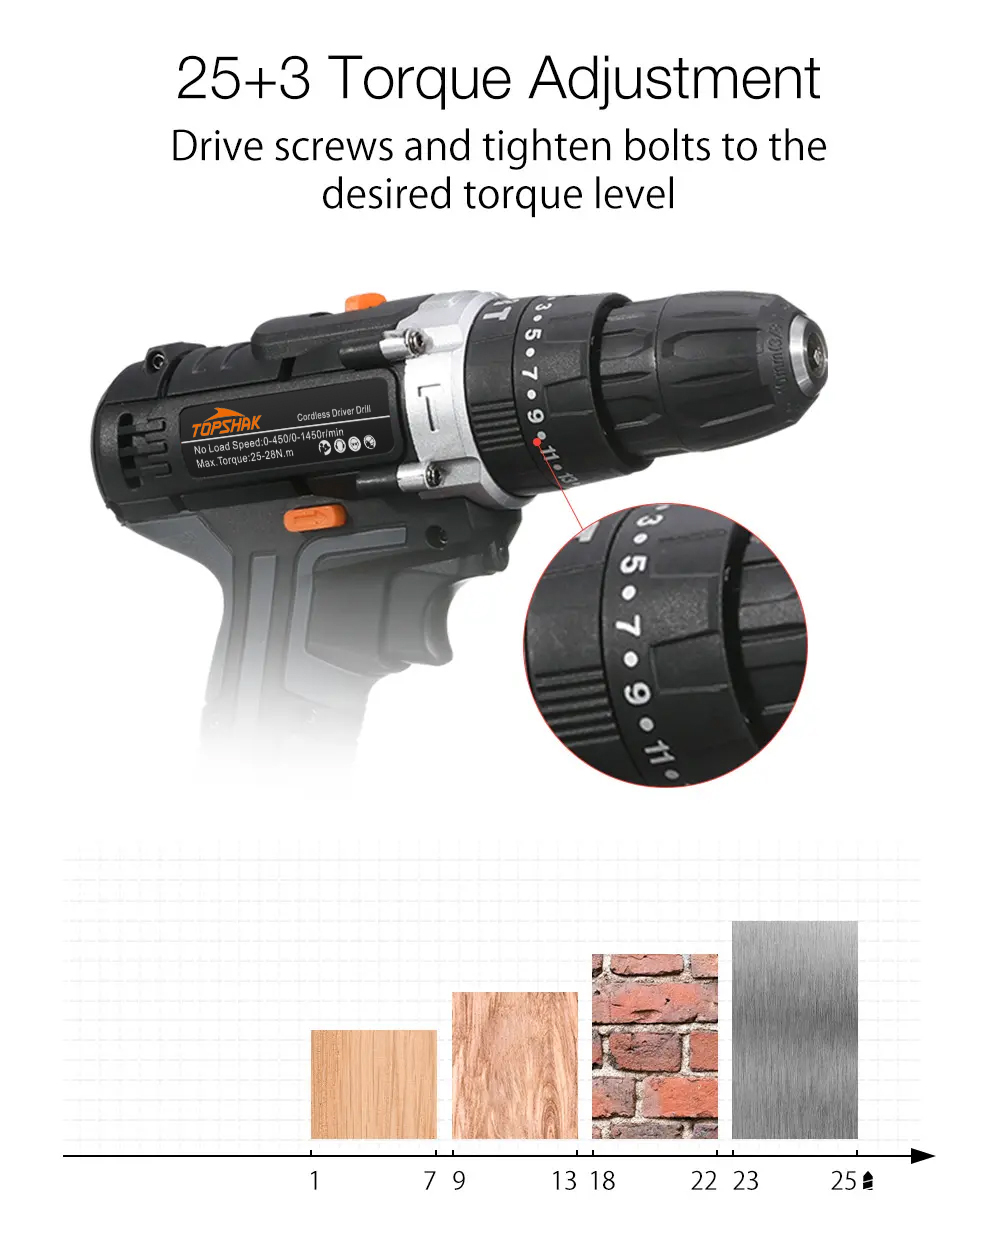 Topshak-TS-ED1-Cordless-Electric-Impact-Drill-Rechargeable-2-Speeds-Drill-Screwdriver-W-1-or-2-Li-io-1523051-2